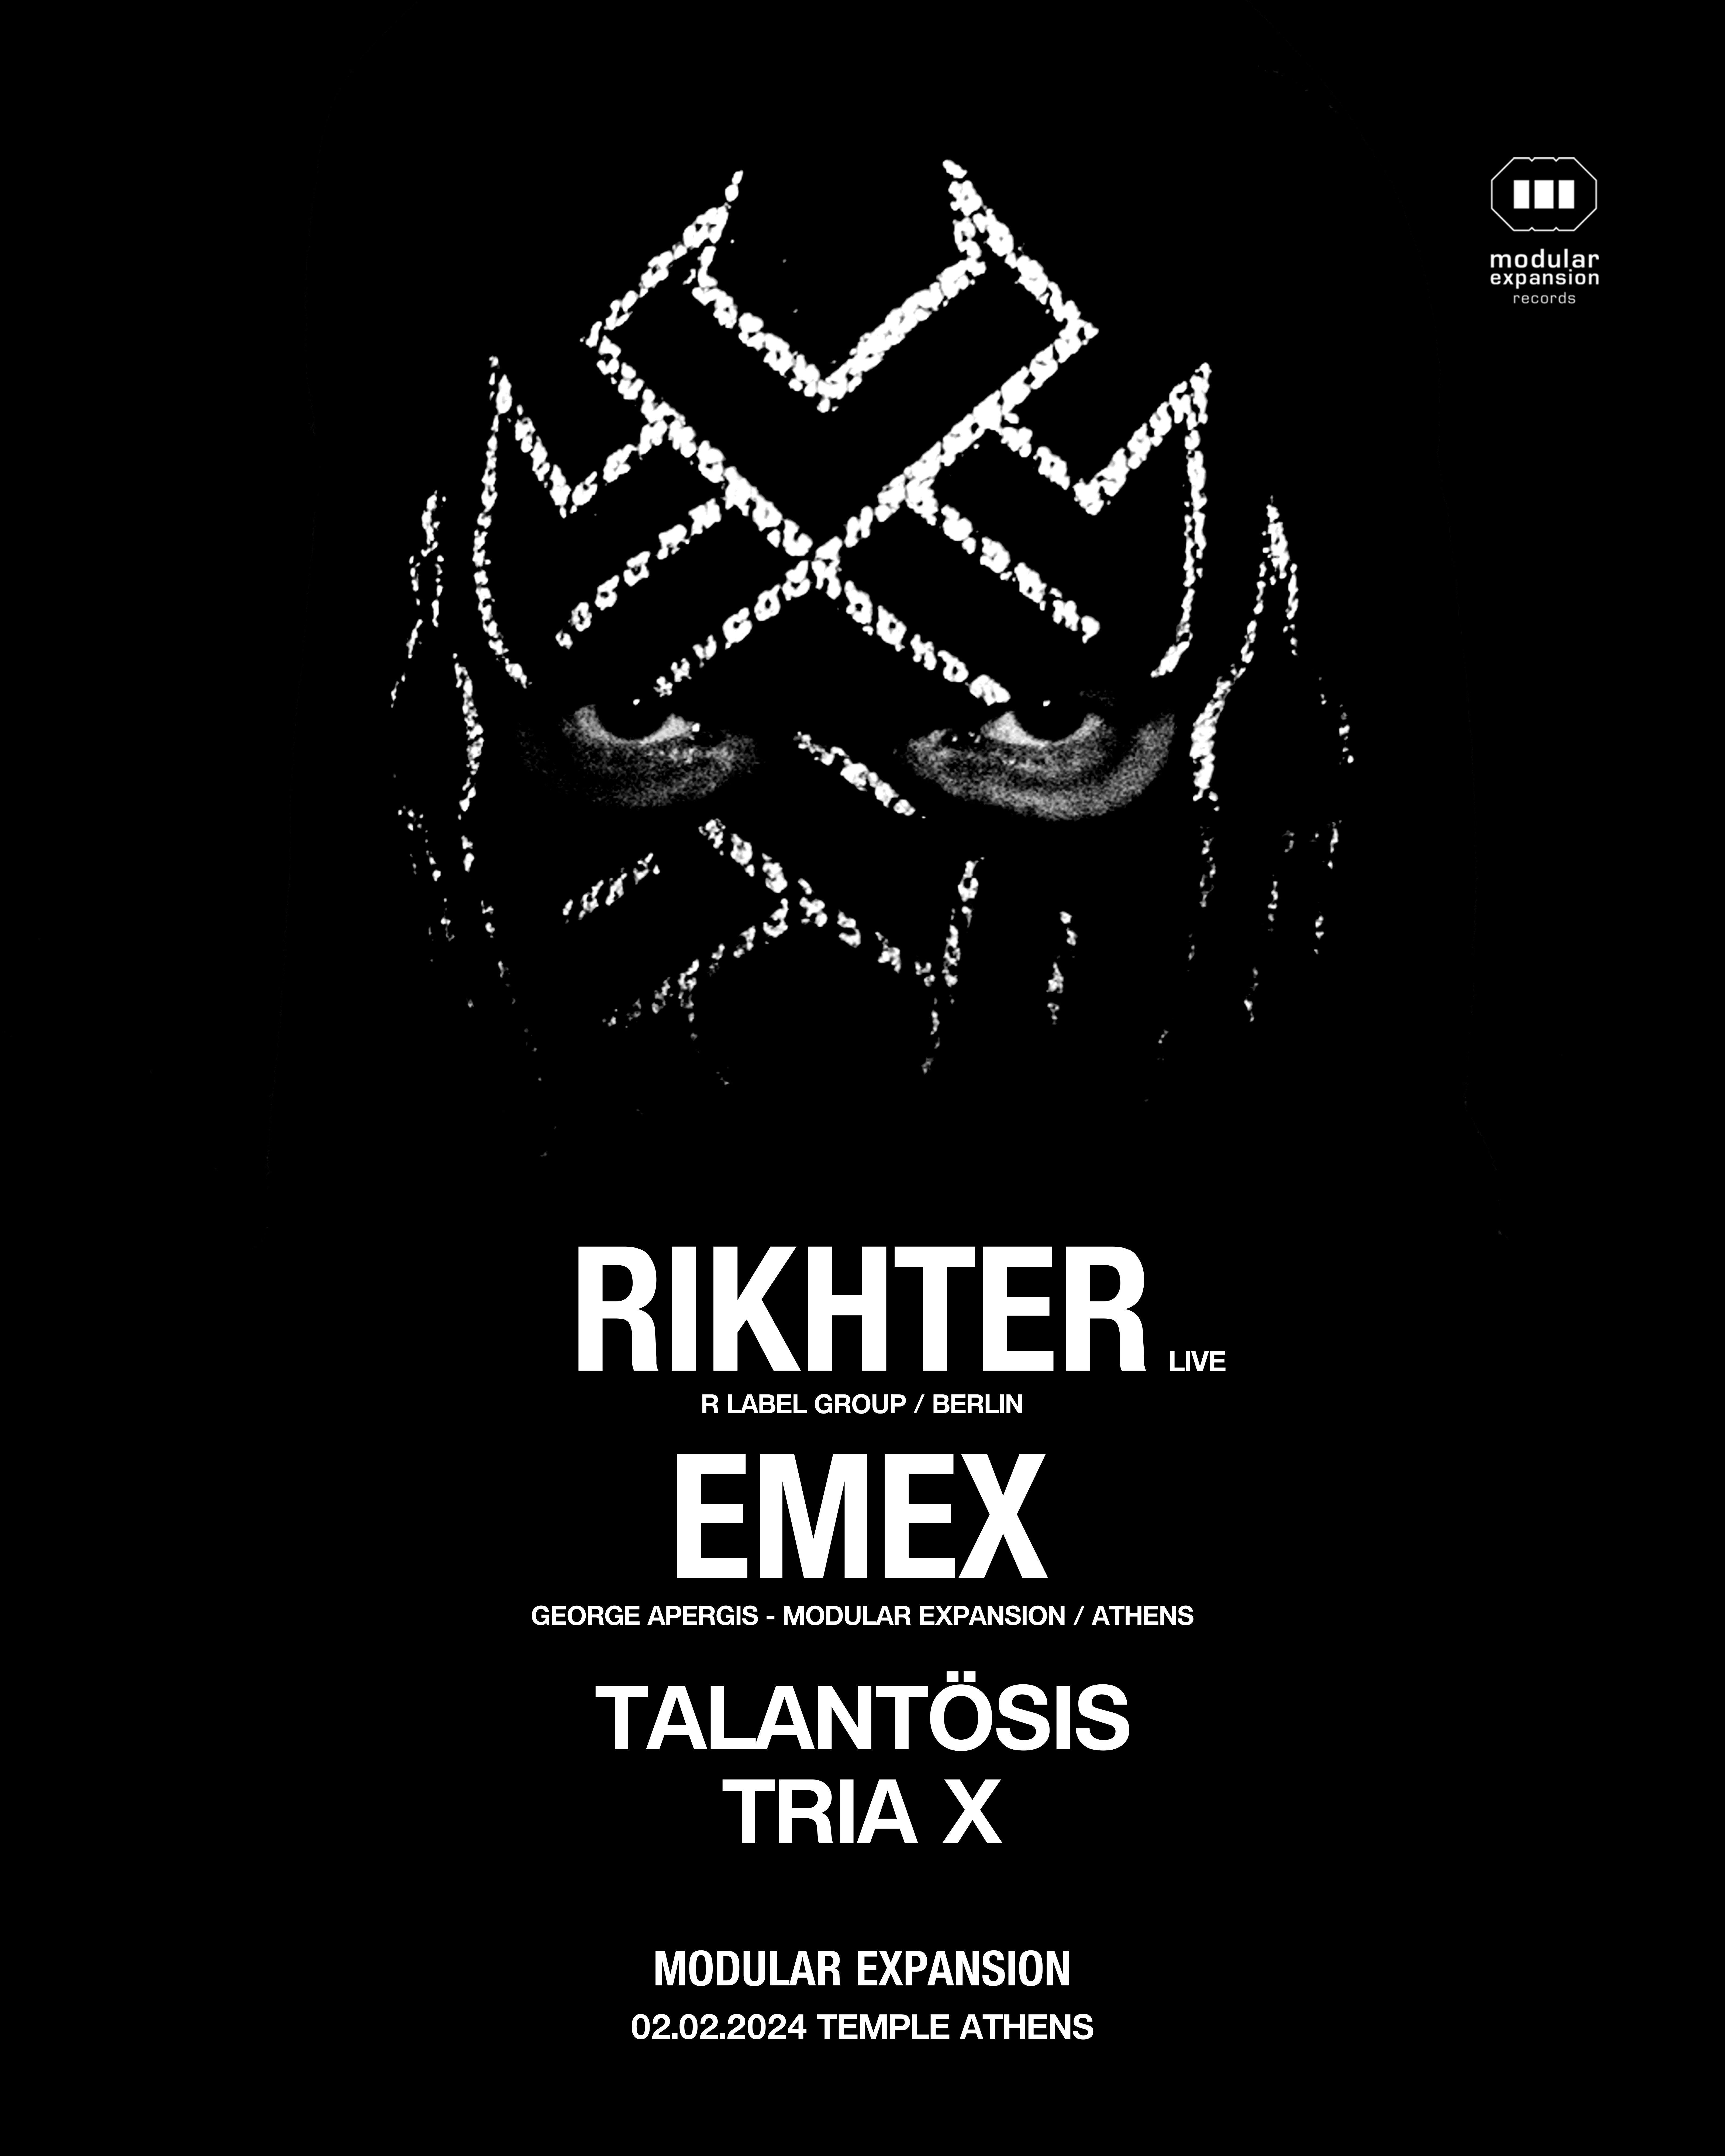 Modular Expansion with RIKHTER Live (R Label Group) - フライヤー裏